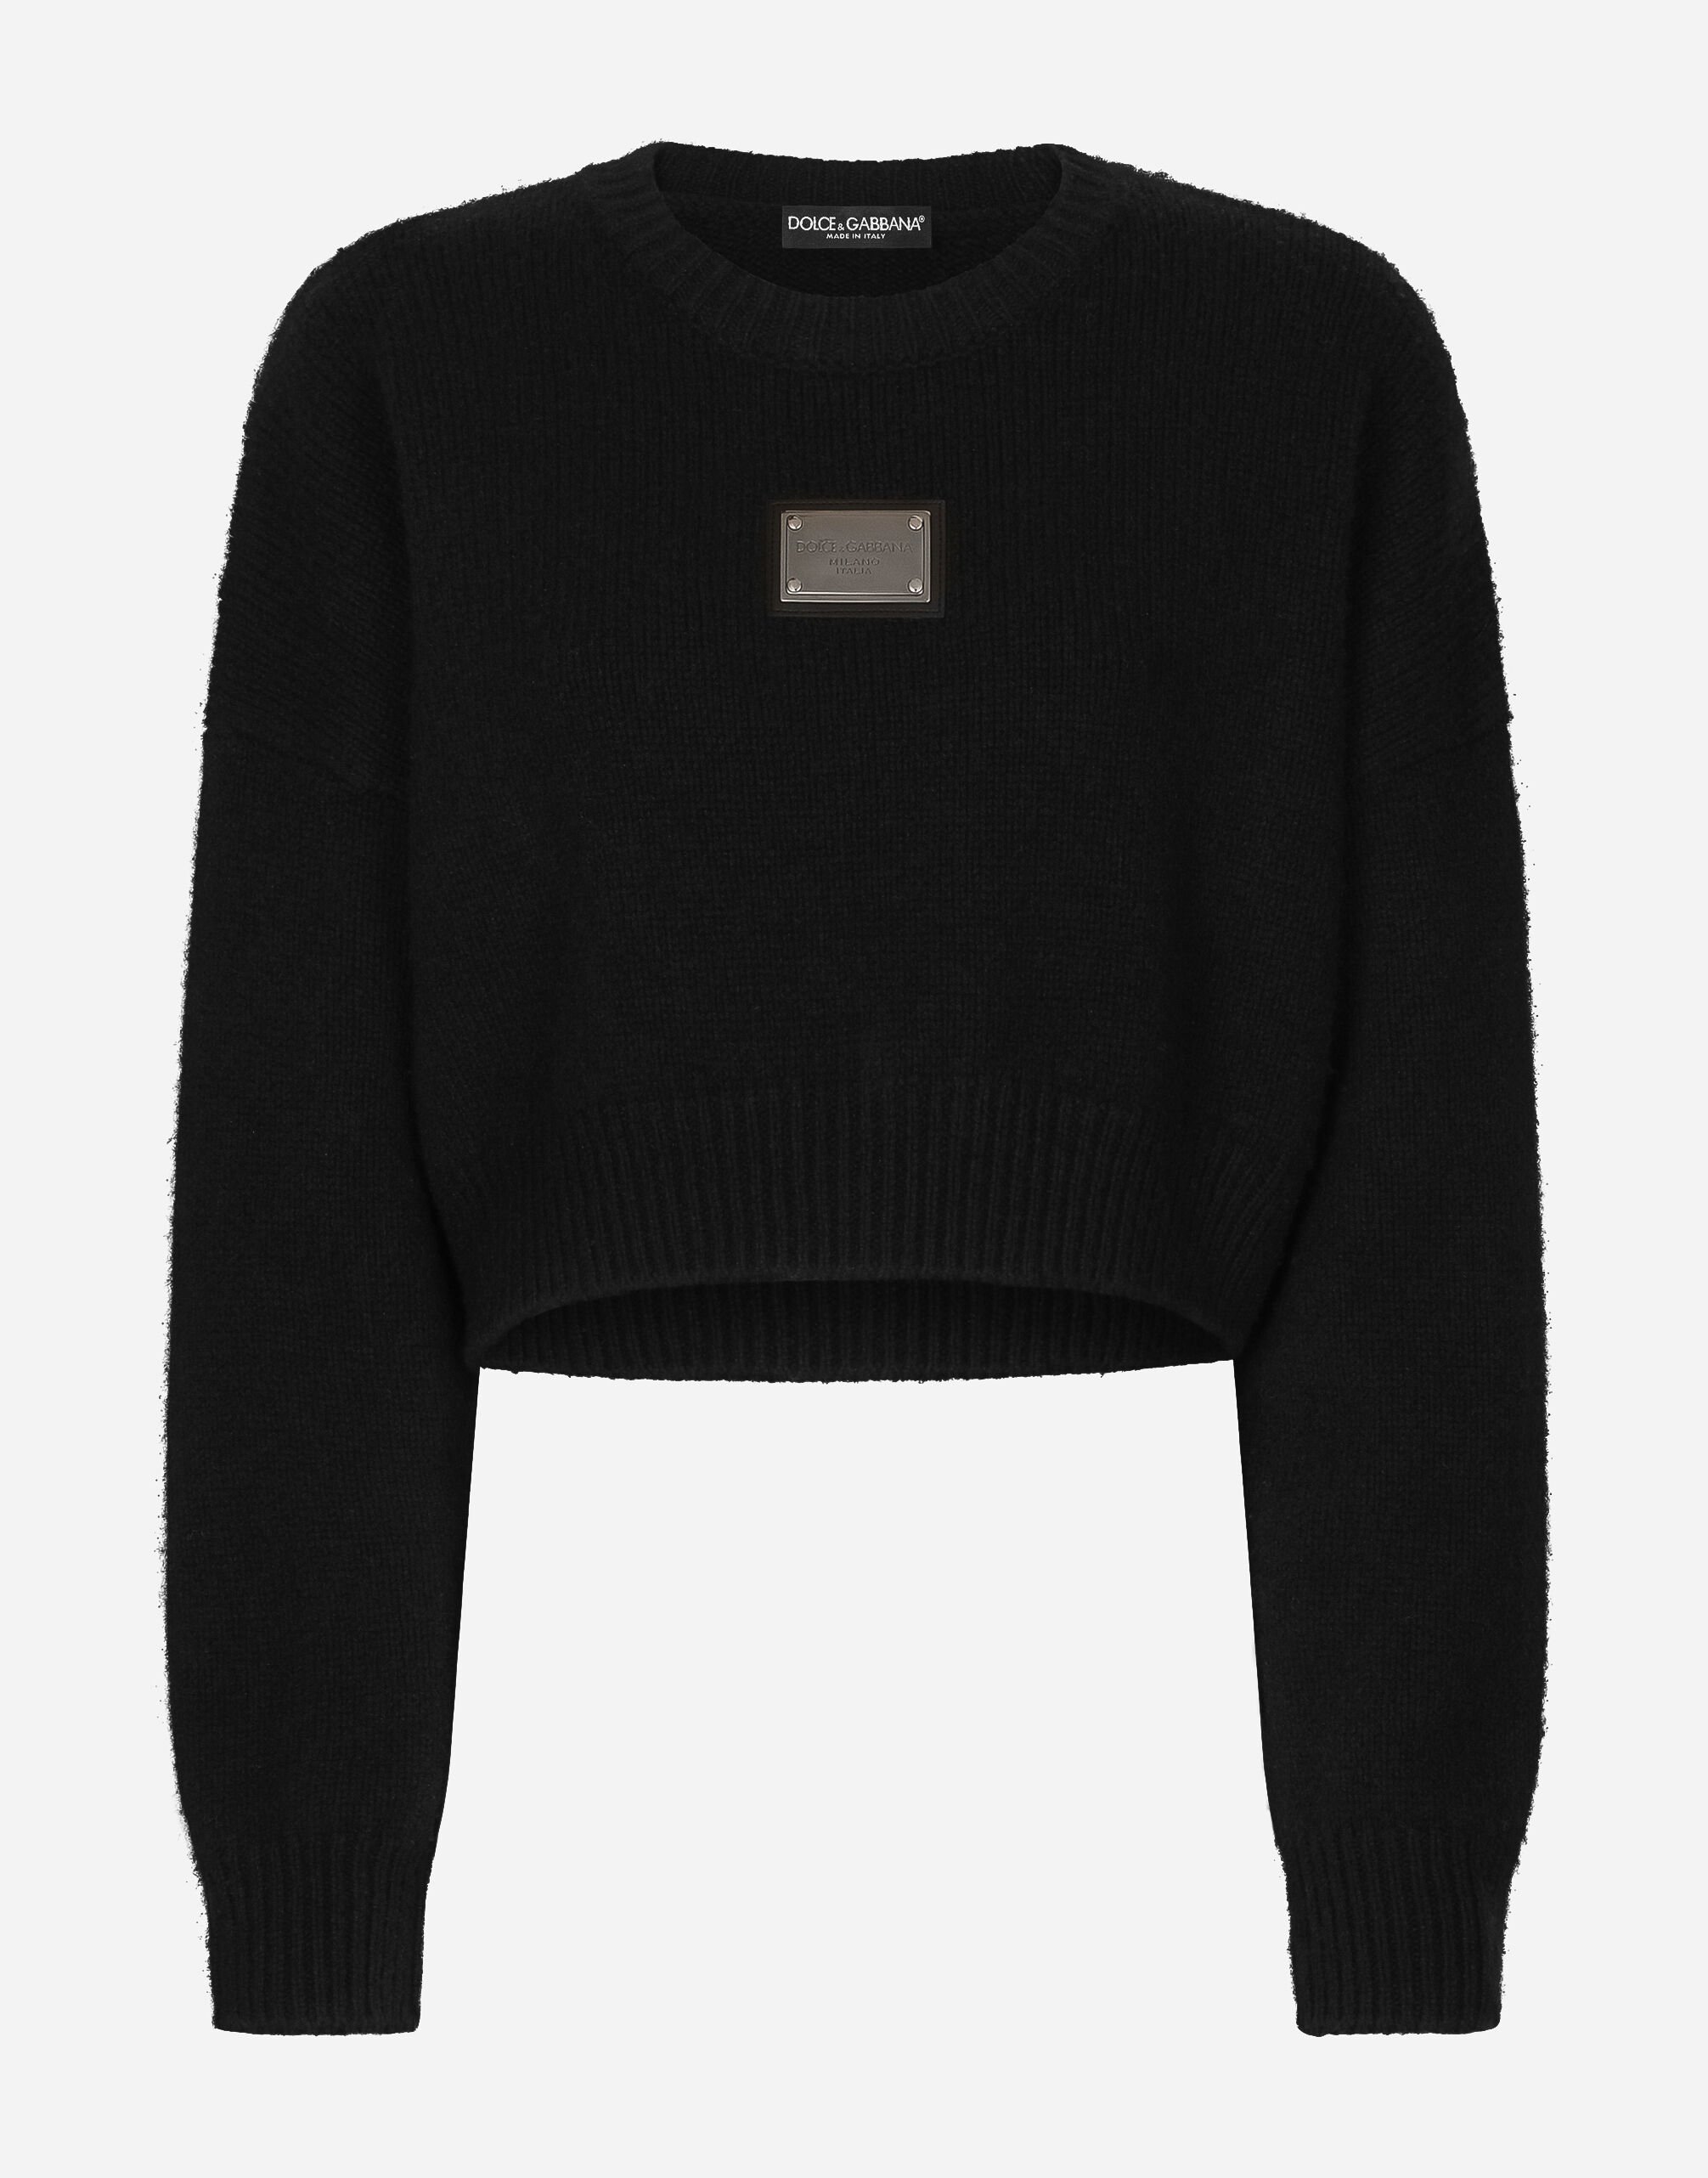 Dolce & Gabbana Wool and cashmere round-neck sweater with logo tag Multicolor FXM23TJCVO8